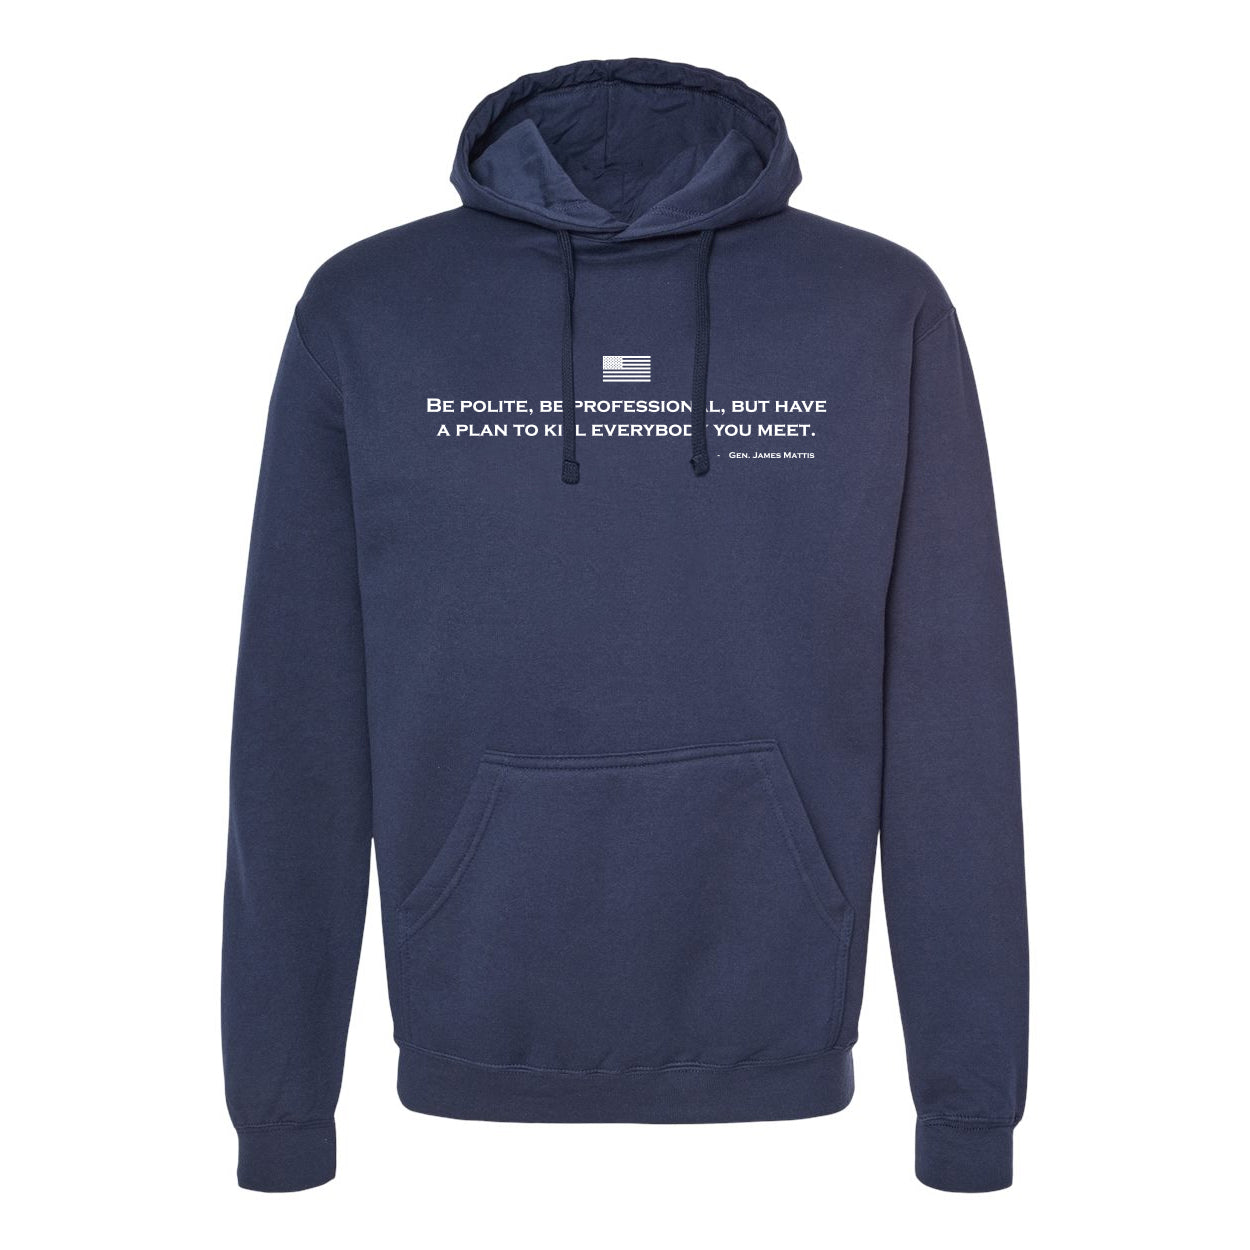 Be Polite and Have a Plan Mattis Quote Hoodie